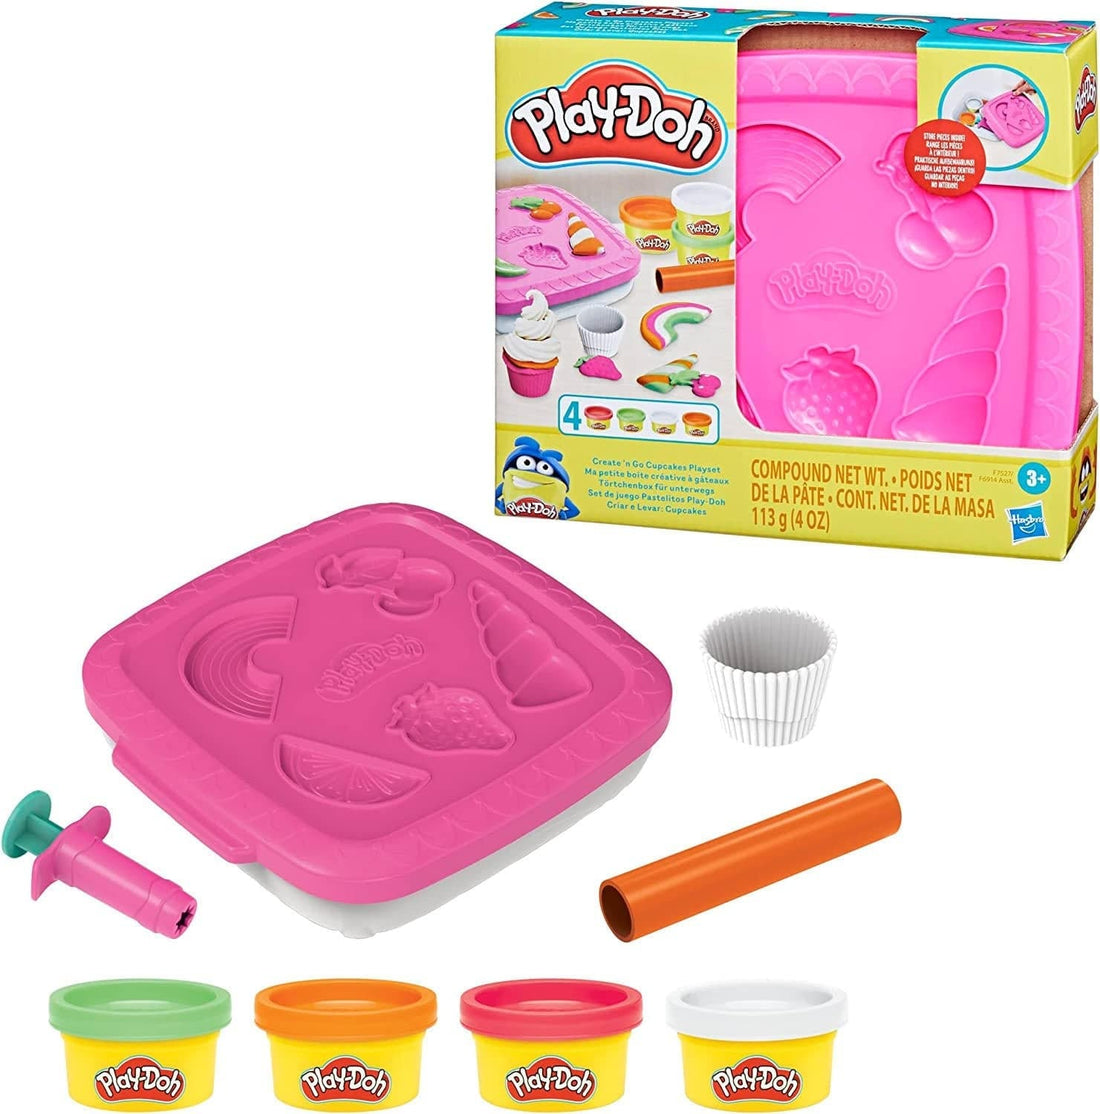 Play Doh Create And Take With You: Cupcake